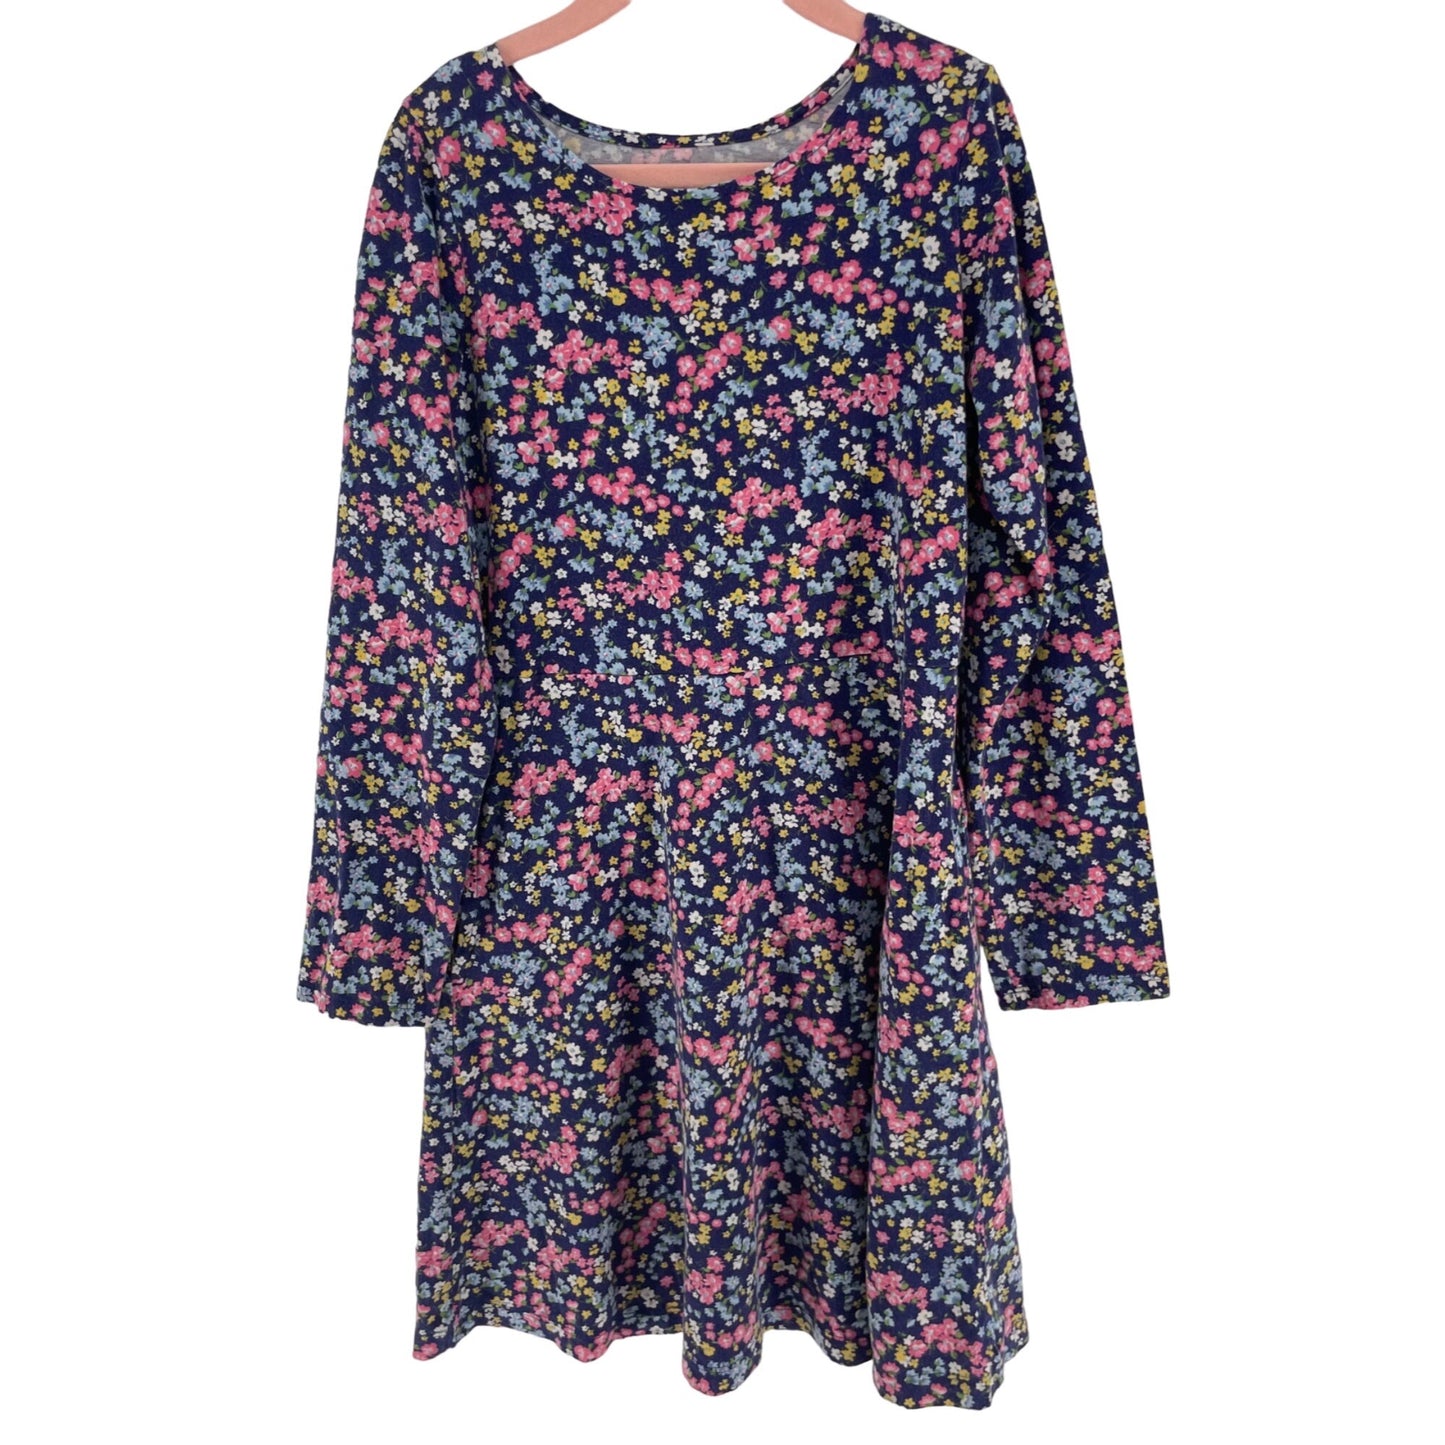 Land's End Girl's Size 7/8 Navy/Multi-Colored Floral Long-Sleeved A-Line Dress